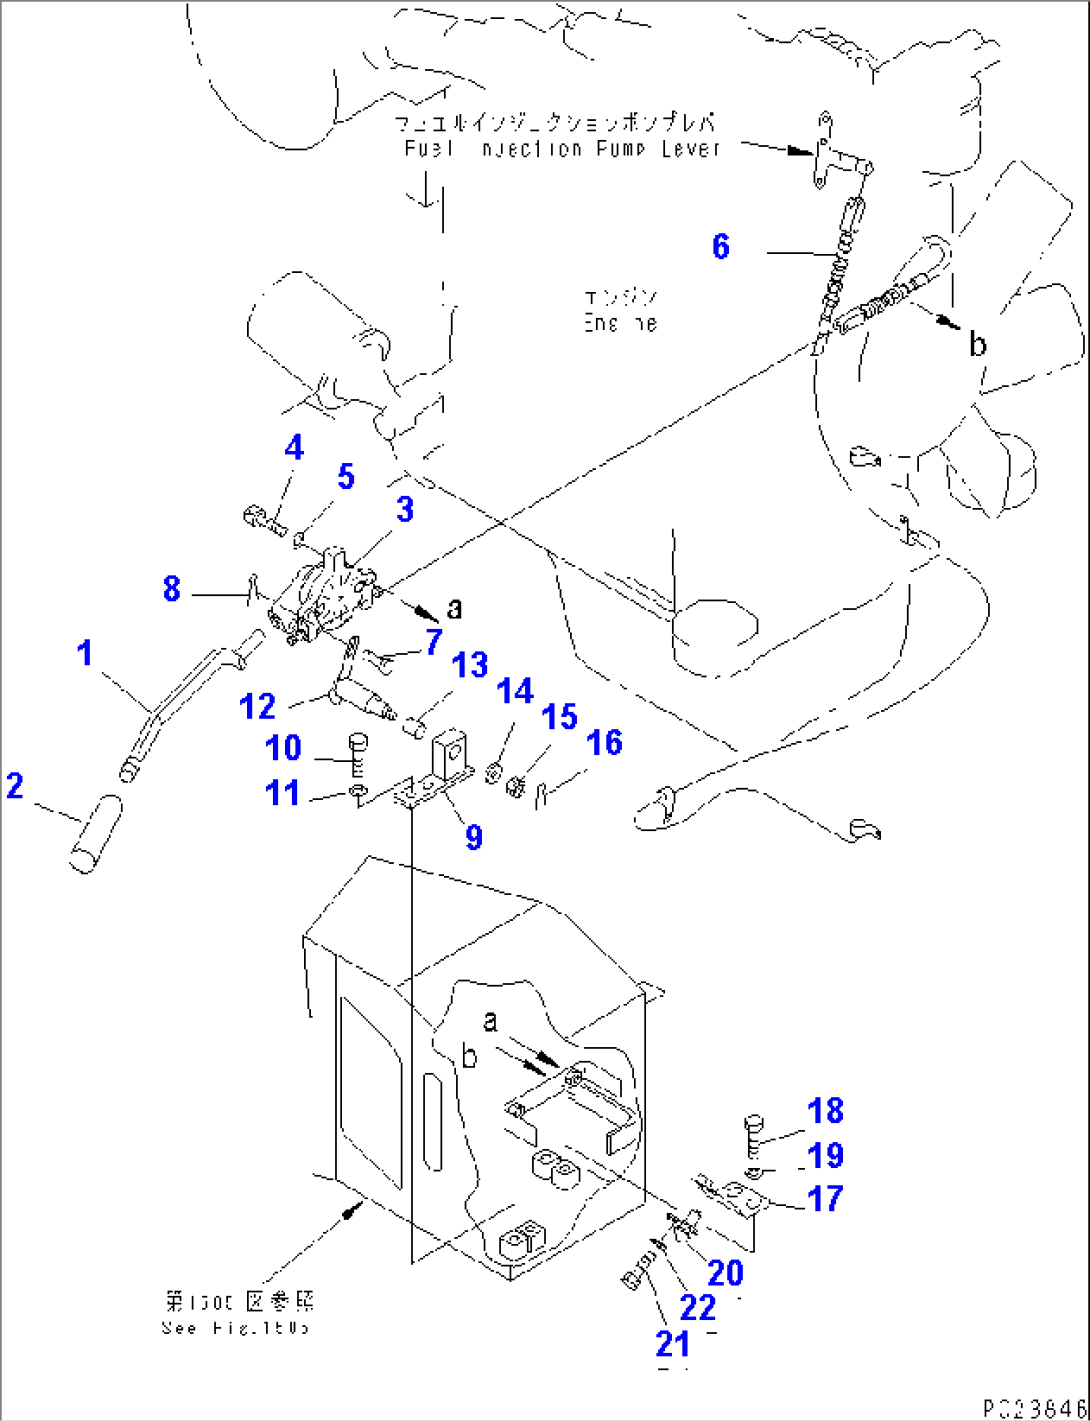 FUEL CONTROL AND LINKAGE (1/2)(#1002-1100)